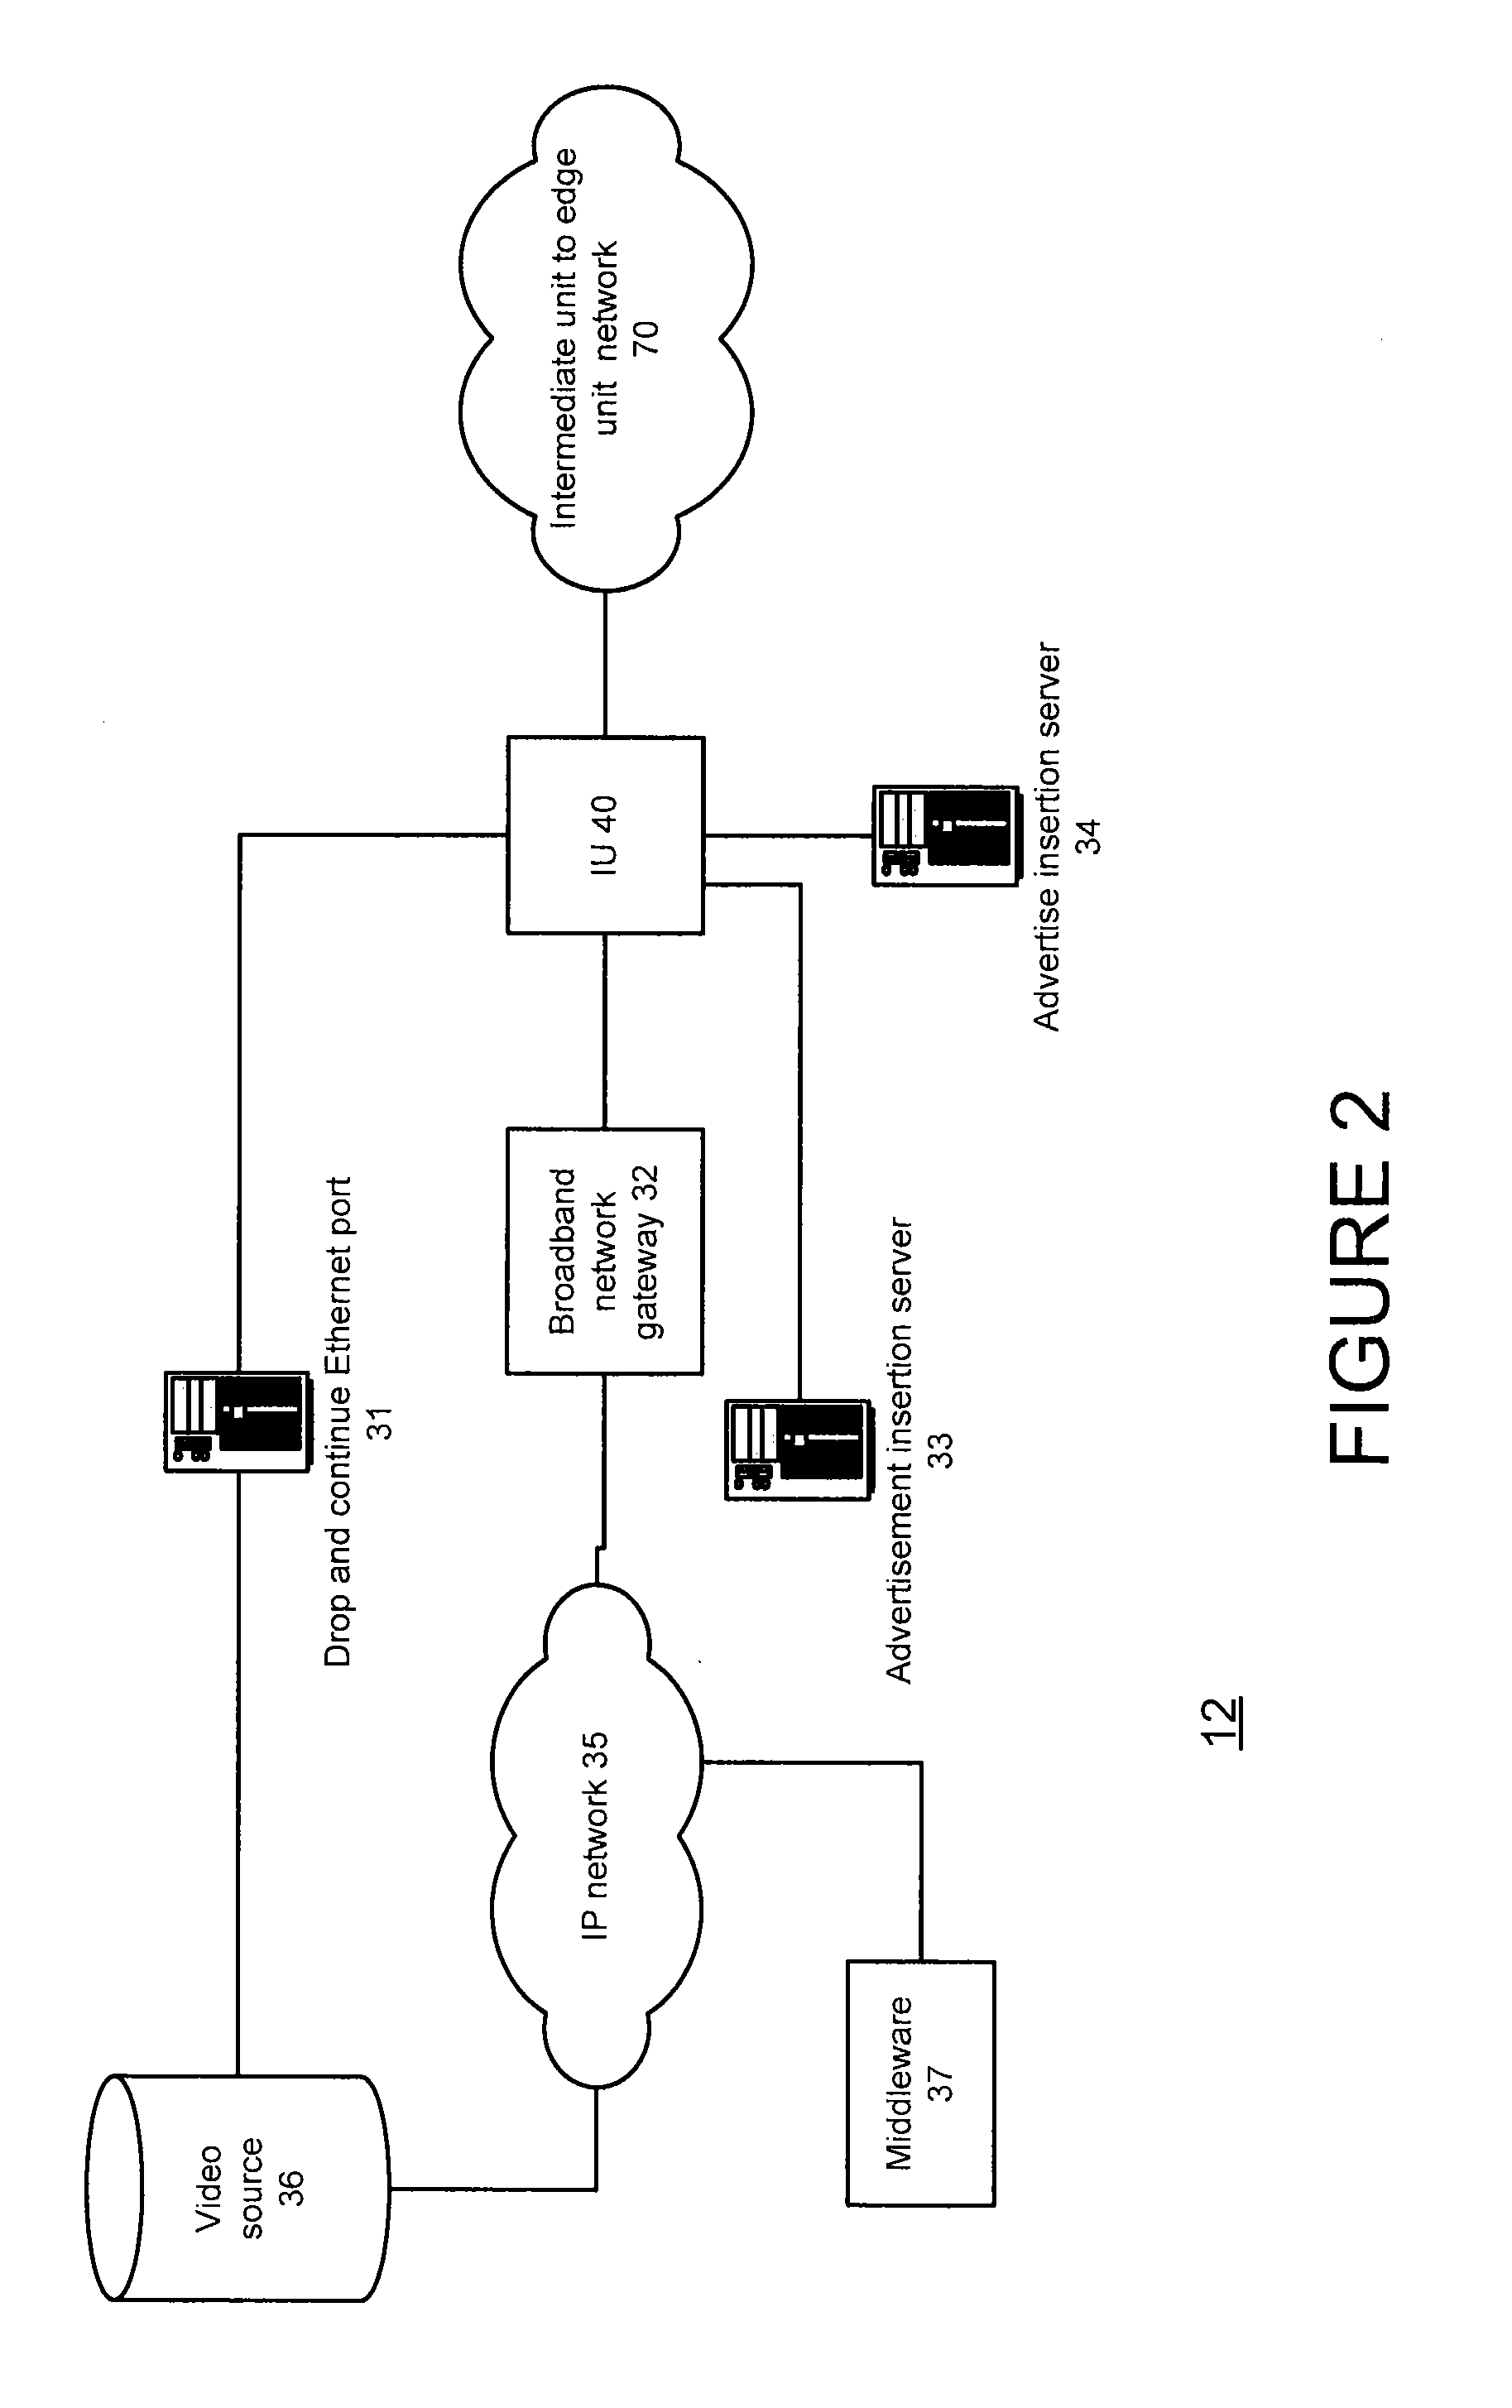 Method and device for providing programs to multiple end user devices